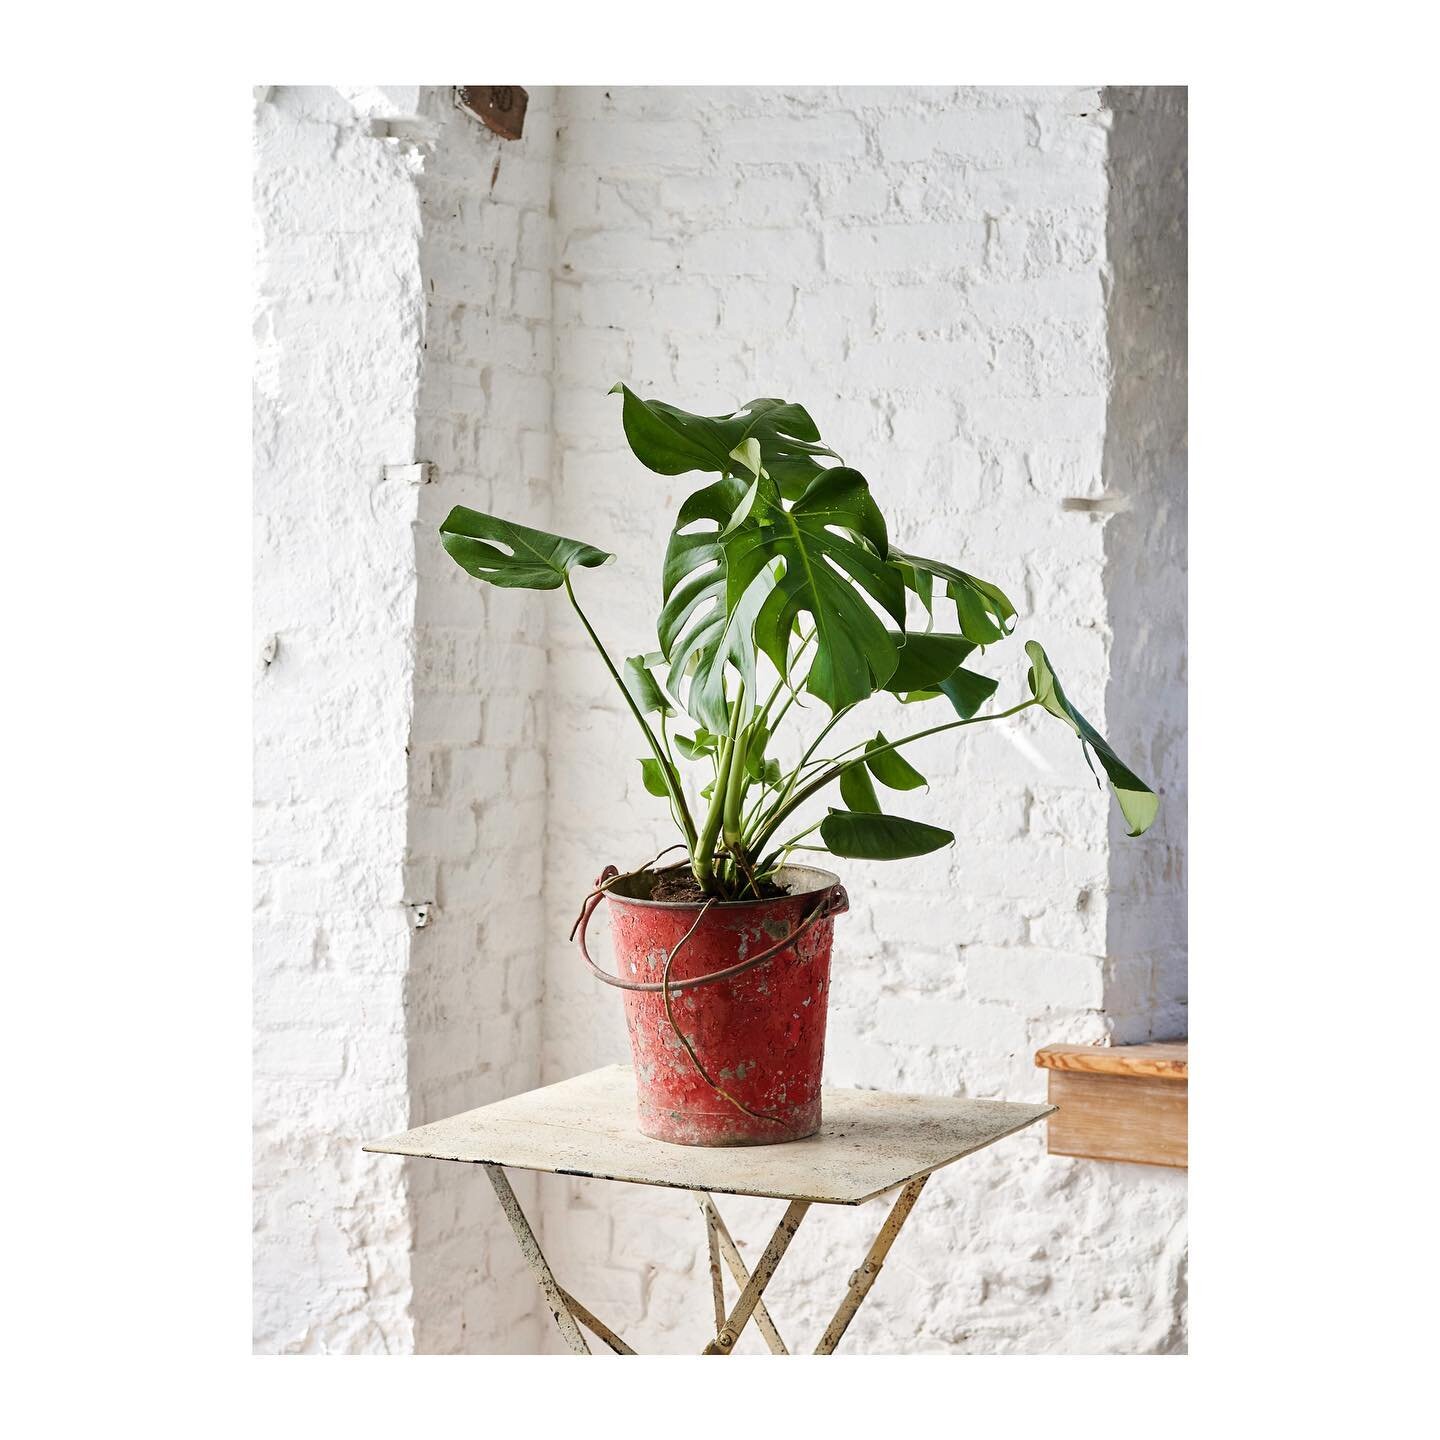 Gone a bit mad for plants in the studio at the moment, new addition monsterra in an old fire bucket I hopelessly failed at haggling for at a reclamation yard&hellip;.this how it goes:

(me) how much for this old fireman&rsquo;s bucket, seeing it has 